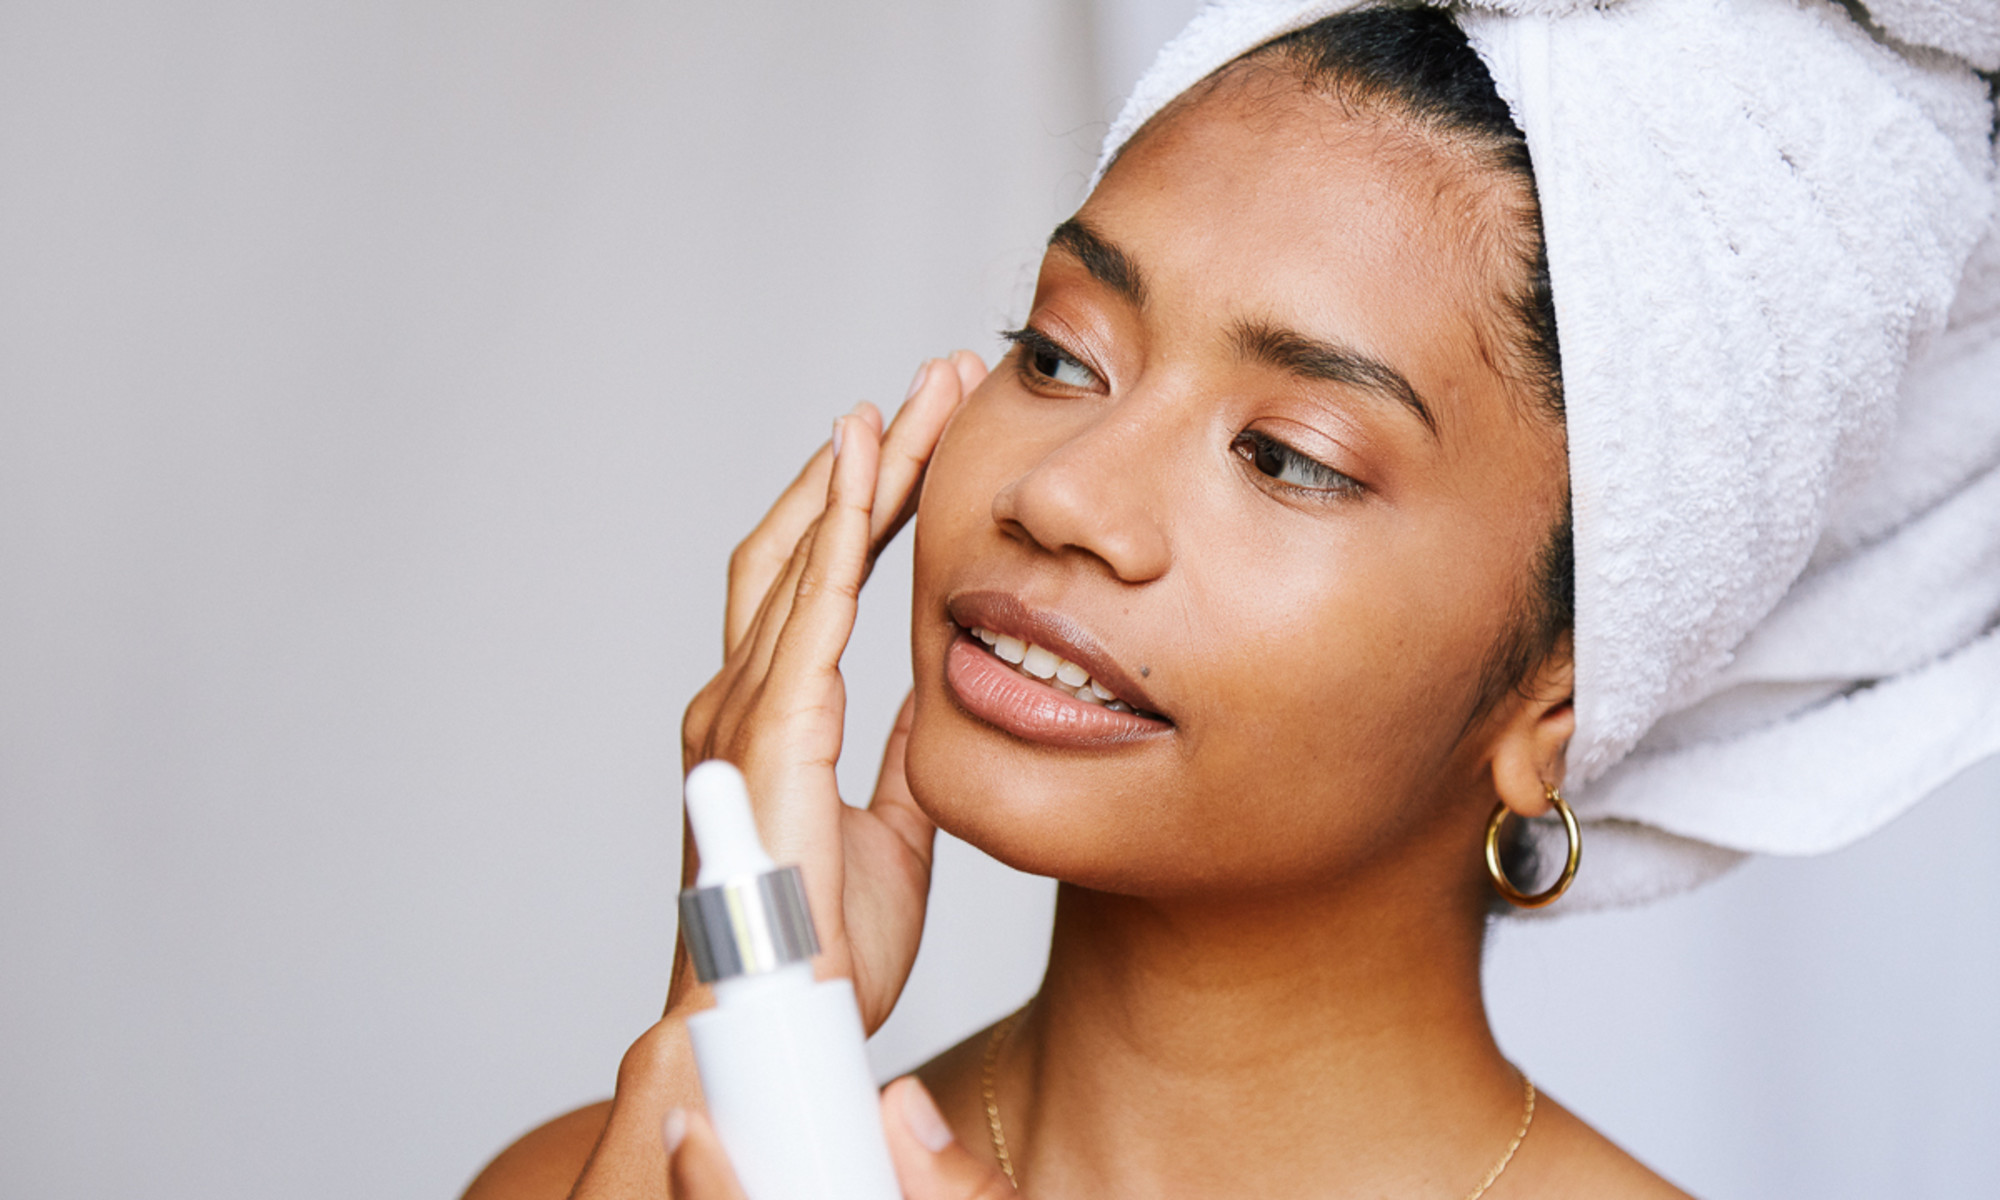 I’m A Celebrity Esthetician & I Tell All Of My Sensitive-Skin Clients To Do This